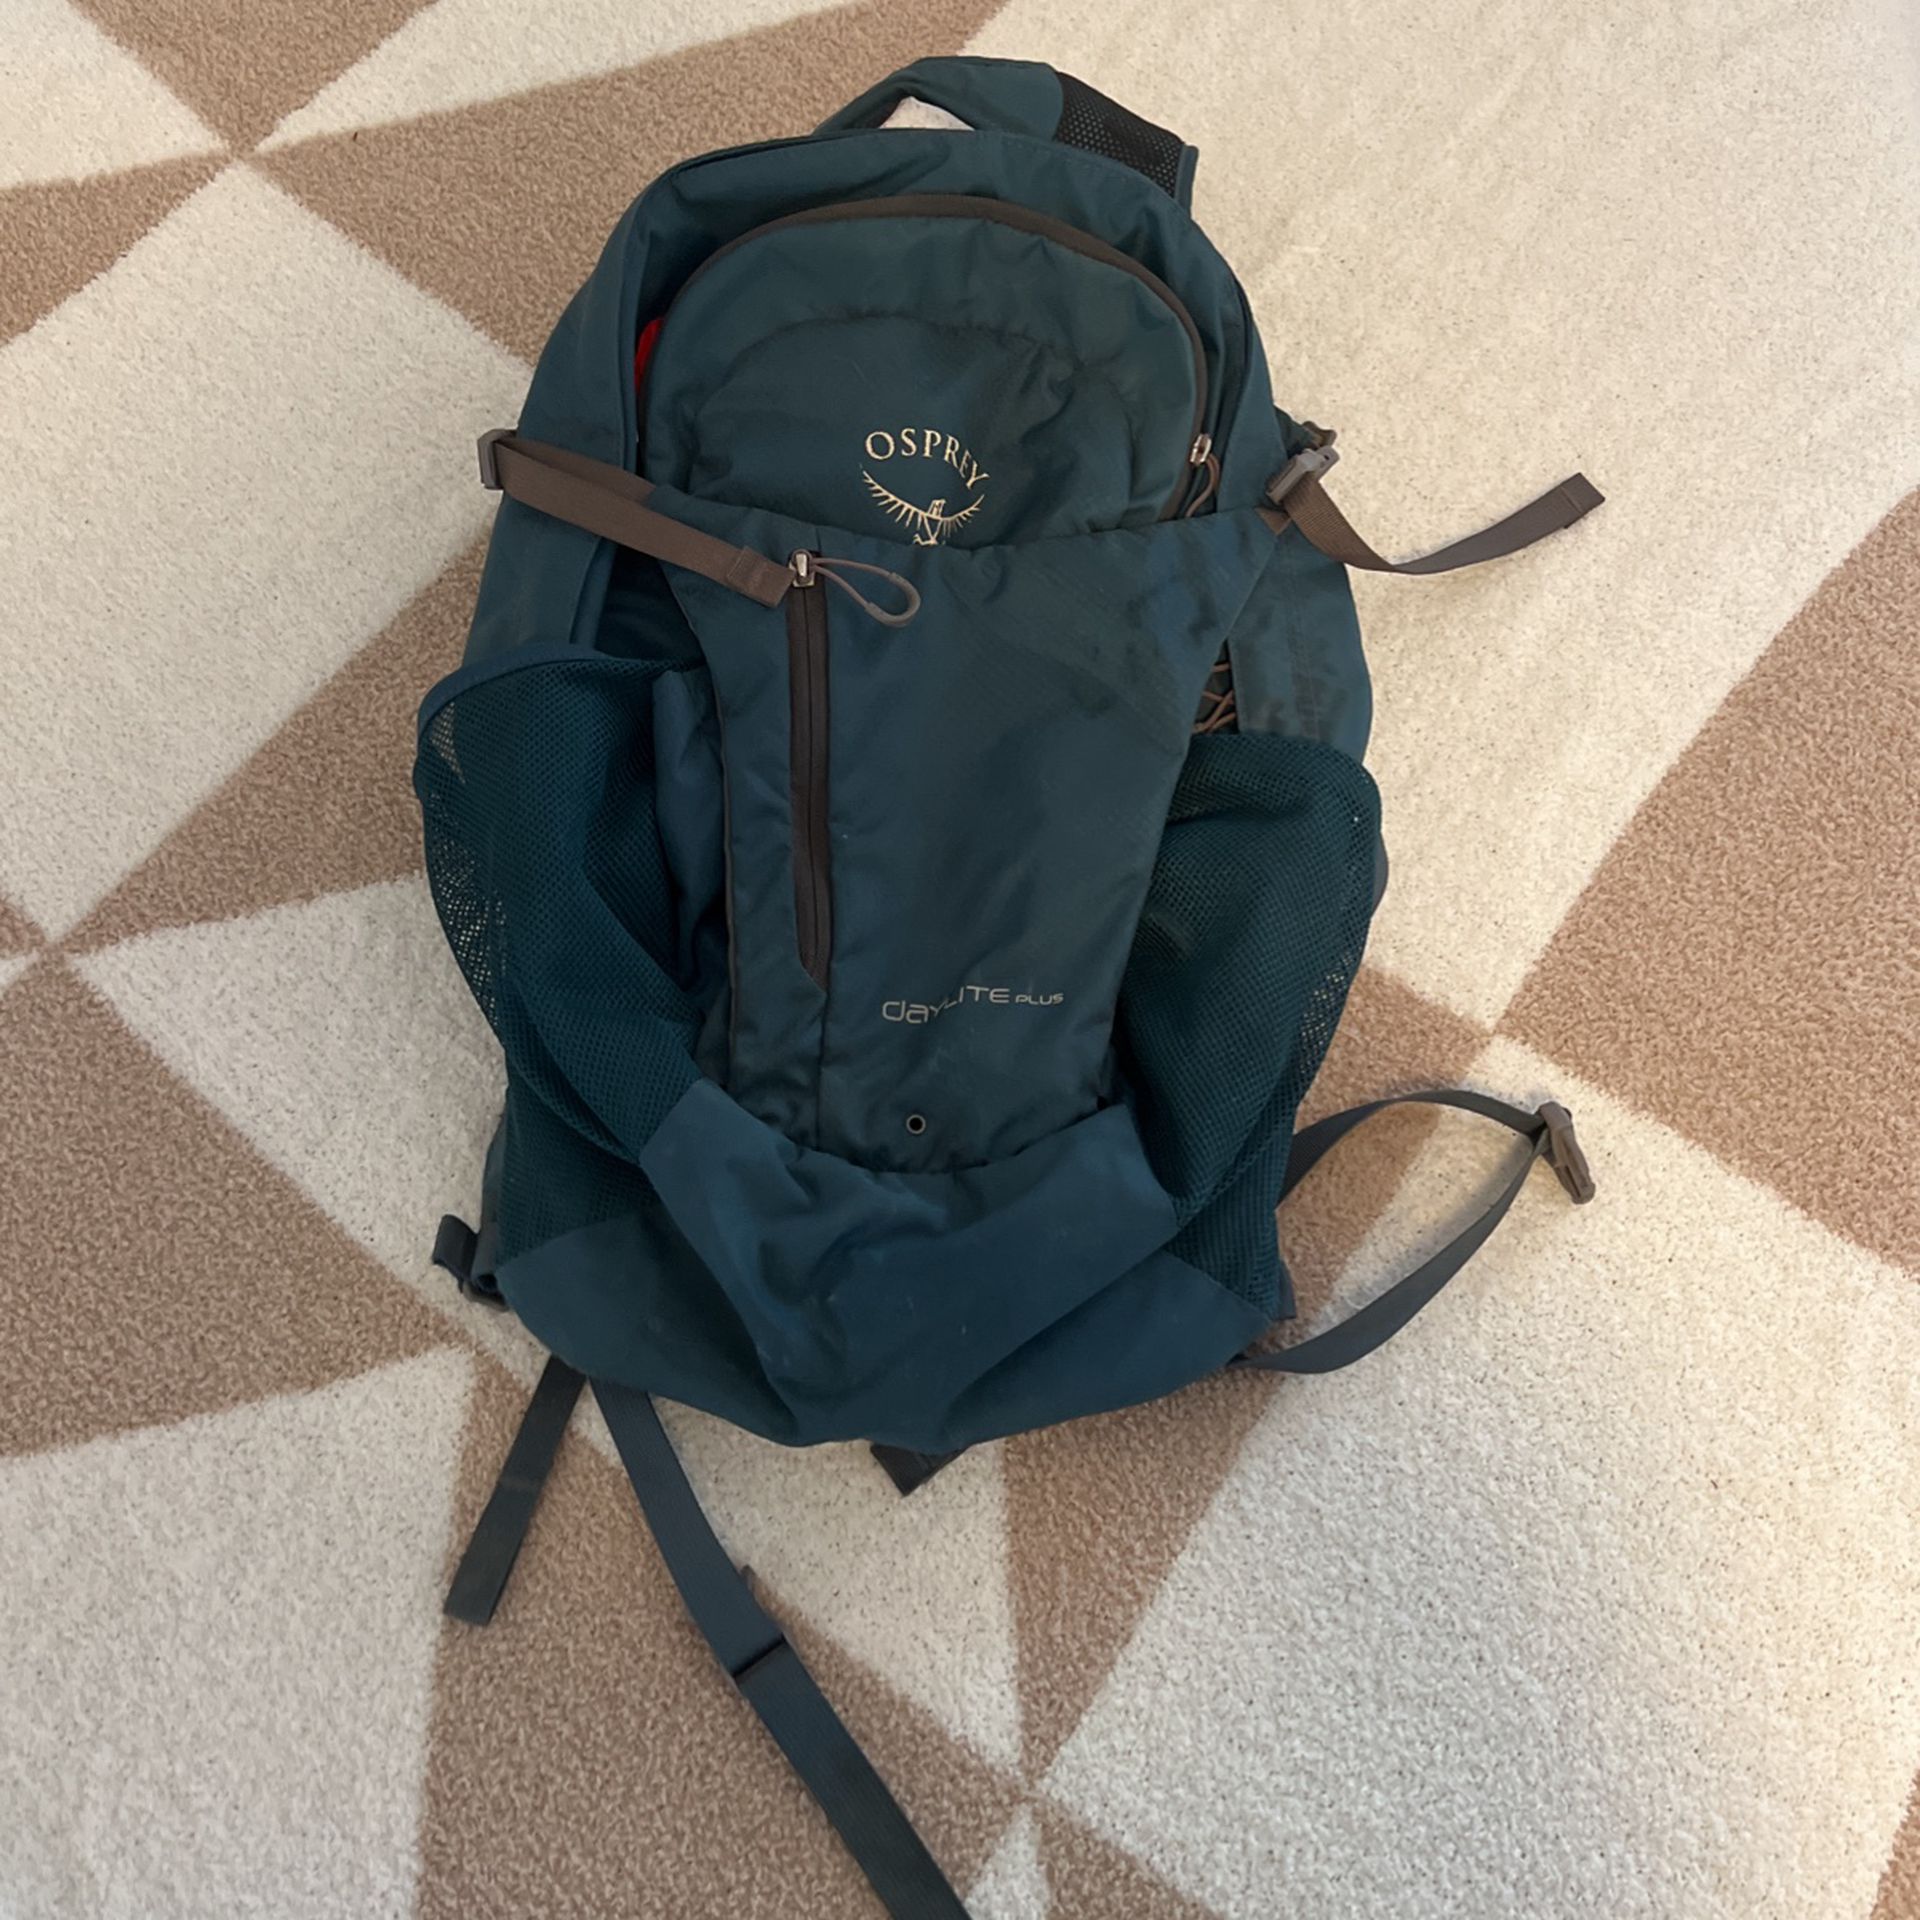 Kids Osprey Daylight Plus Hiking And Camping Backpack